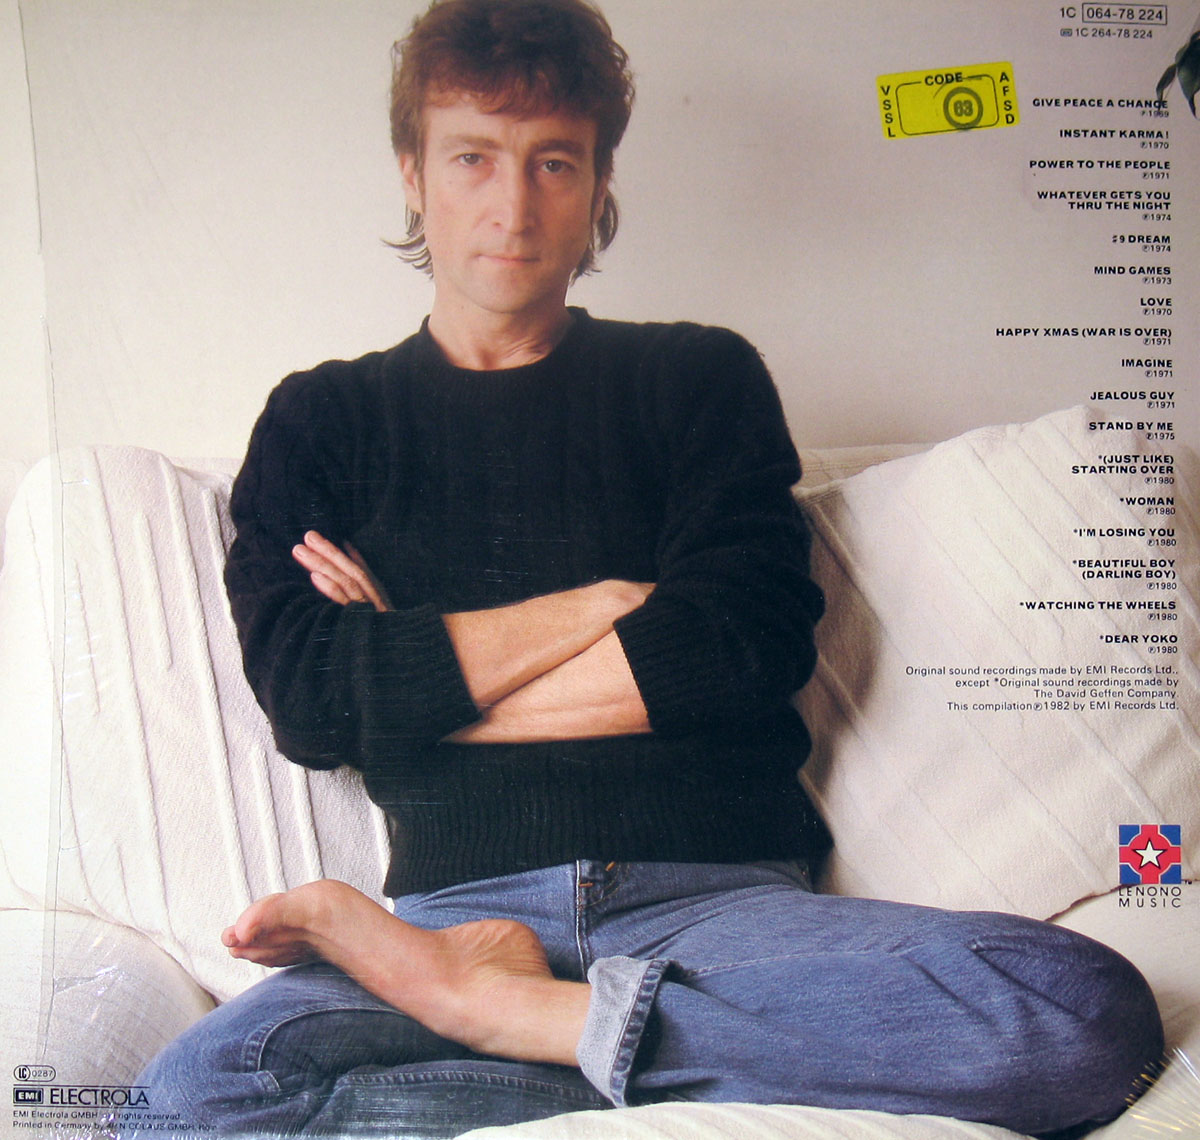 Photo of John Lennon sitting on a couch with legs crossed